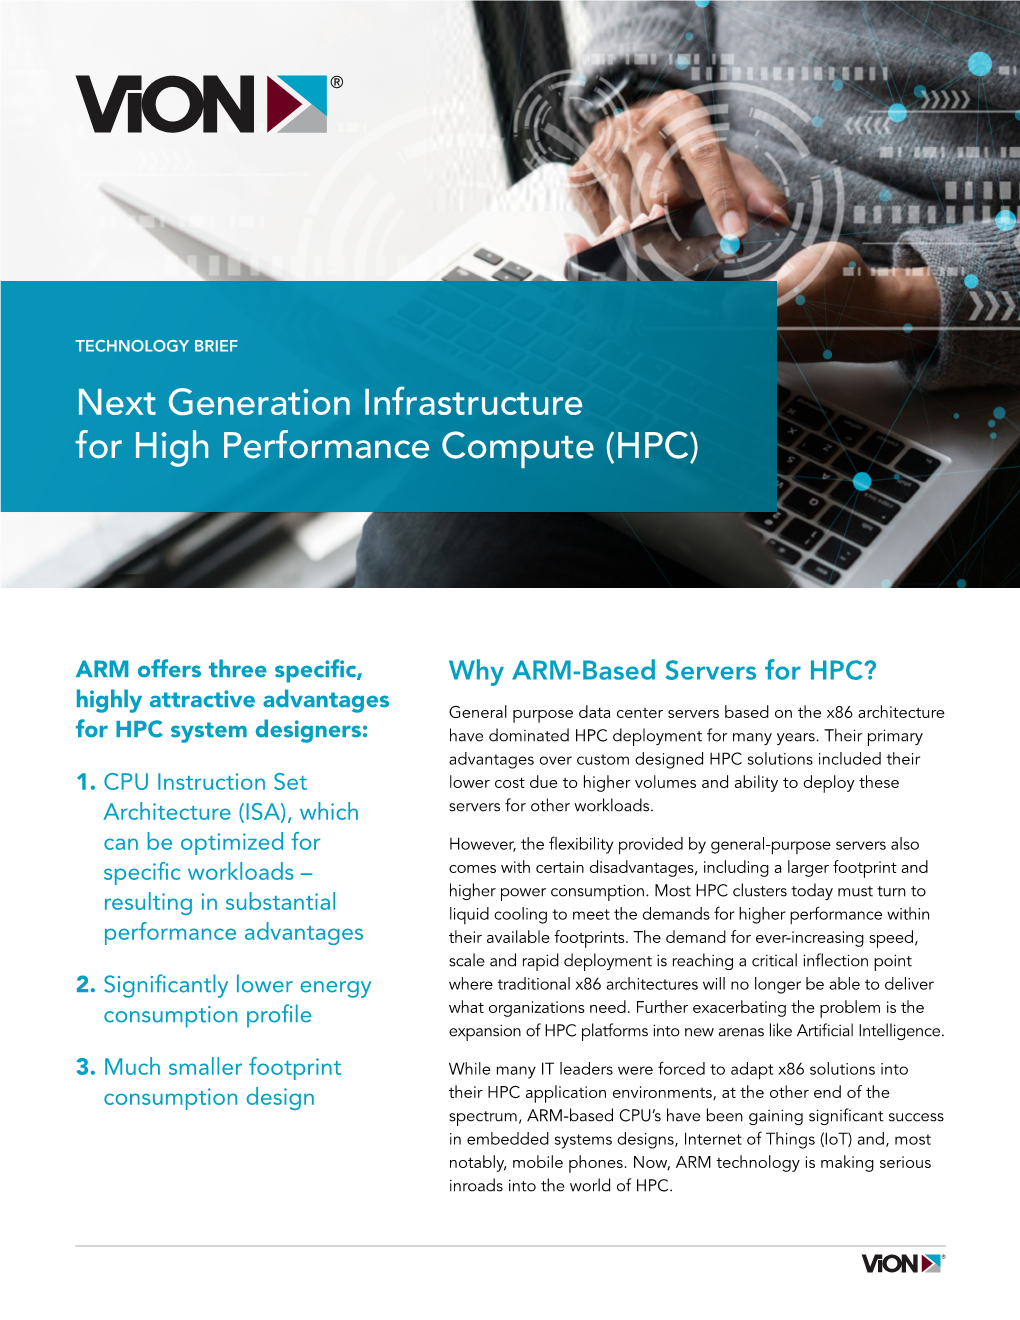 Next Generation Infrastructure for High Performance Compute (HPC)